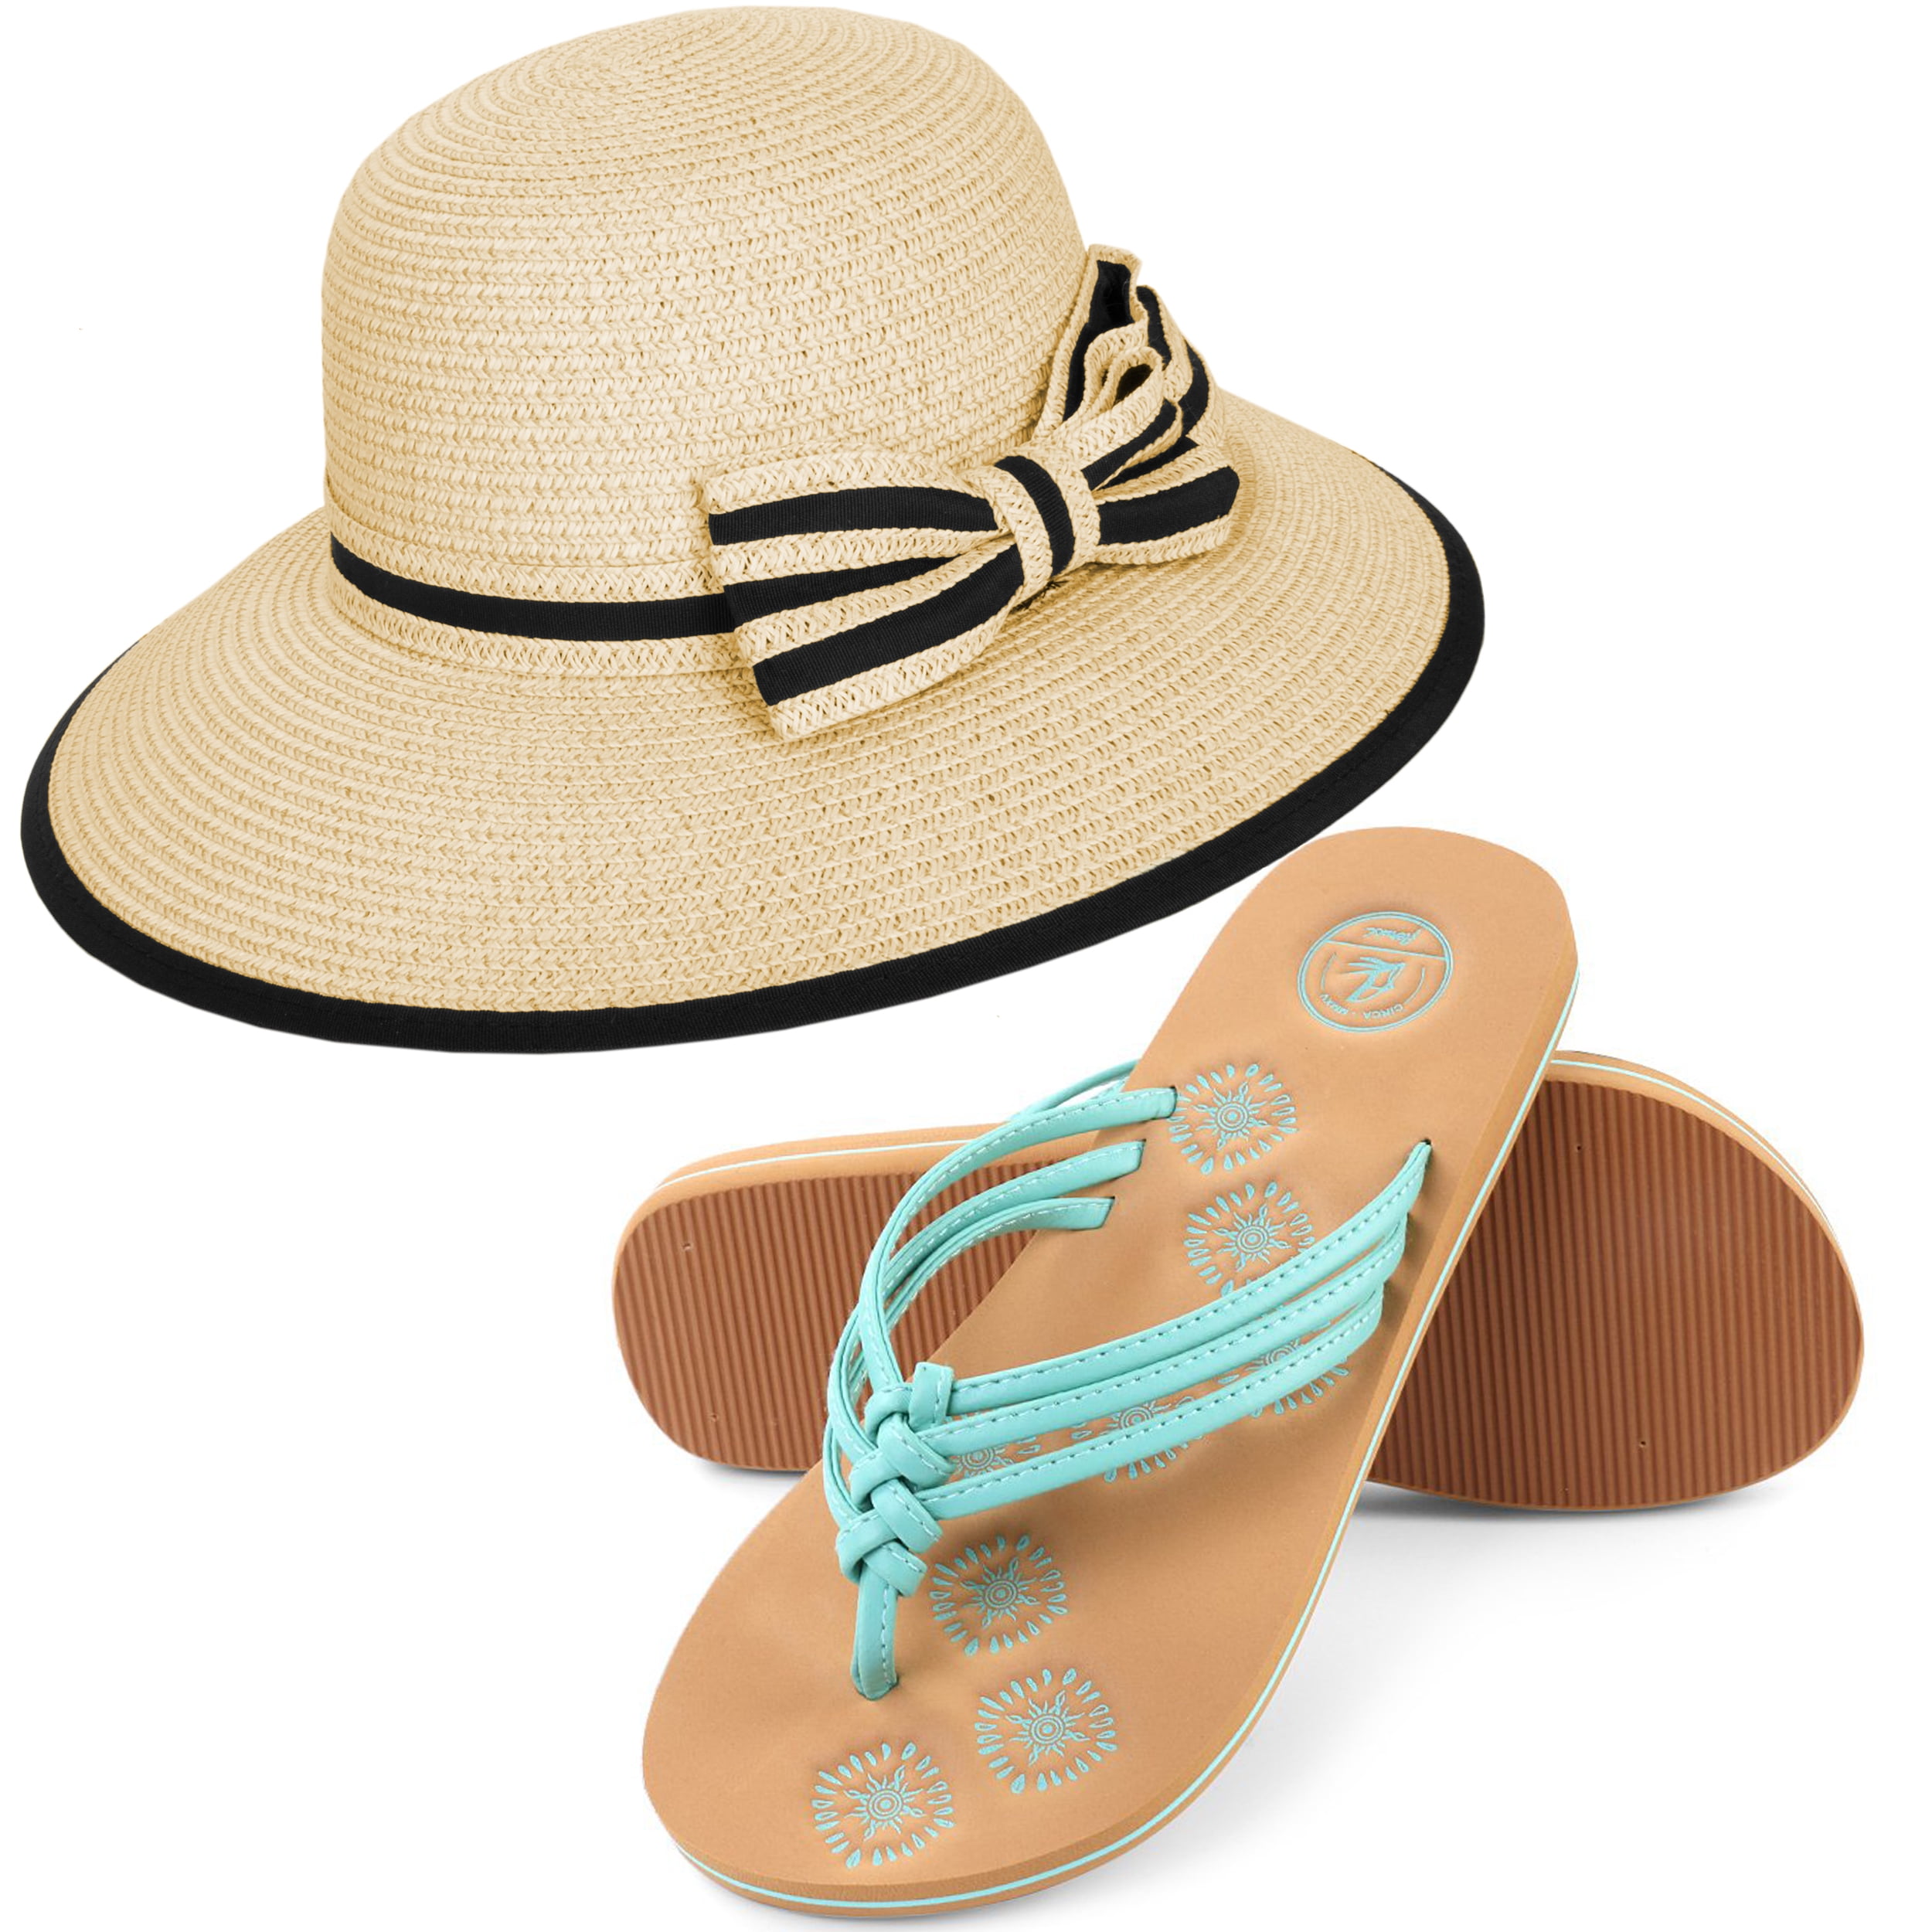 Amazon.com : Straw Sandals for Women, Flat Casual Beach Slippers Cross Woven  Round Open Toe Sandals Roman Style Summer Ladies Outdoor Slippers (Beige,  8.5) : Sports & Outdoors